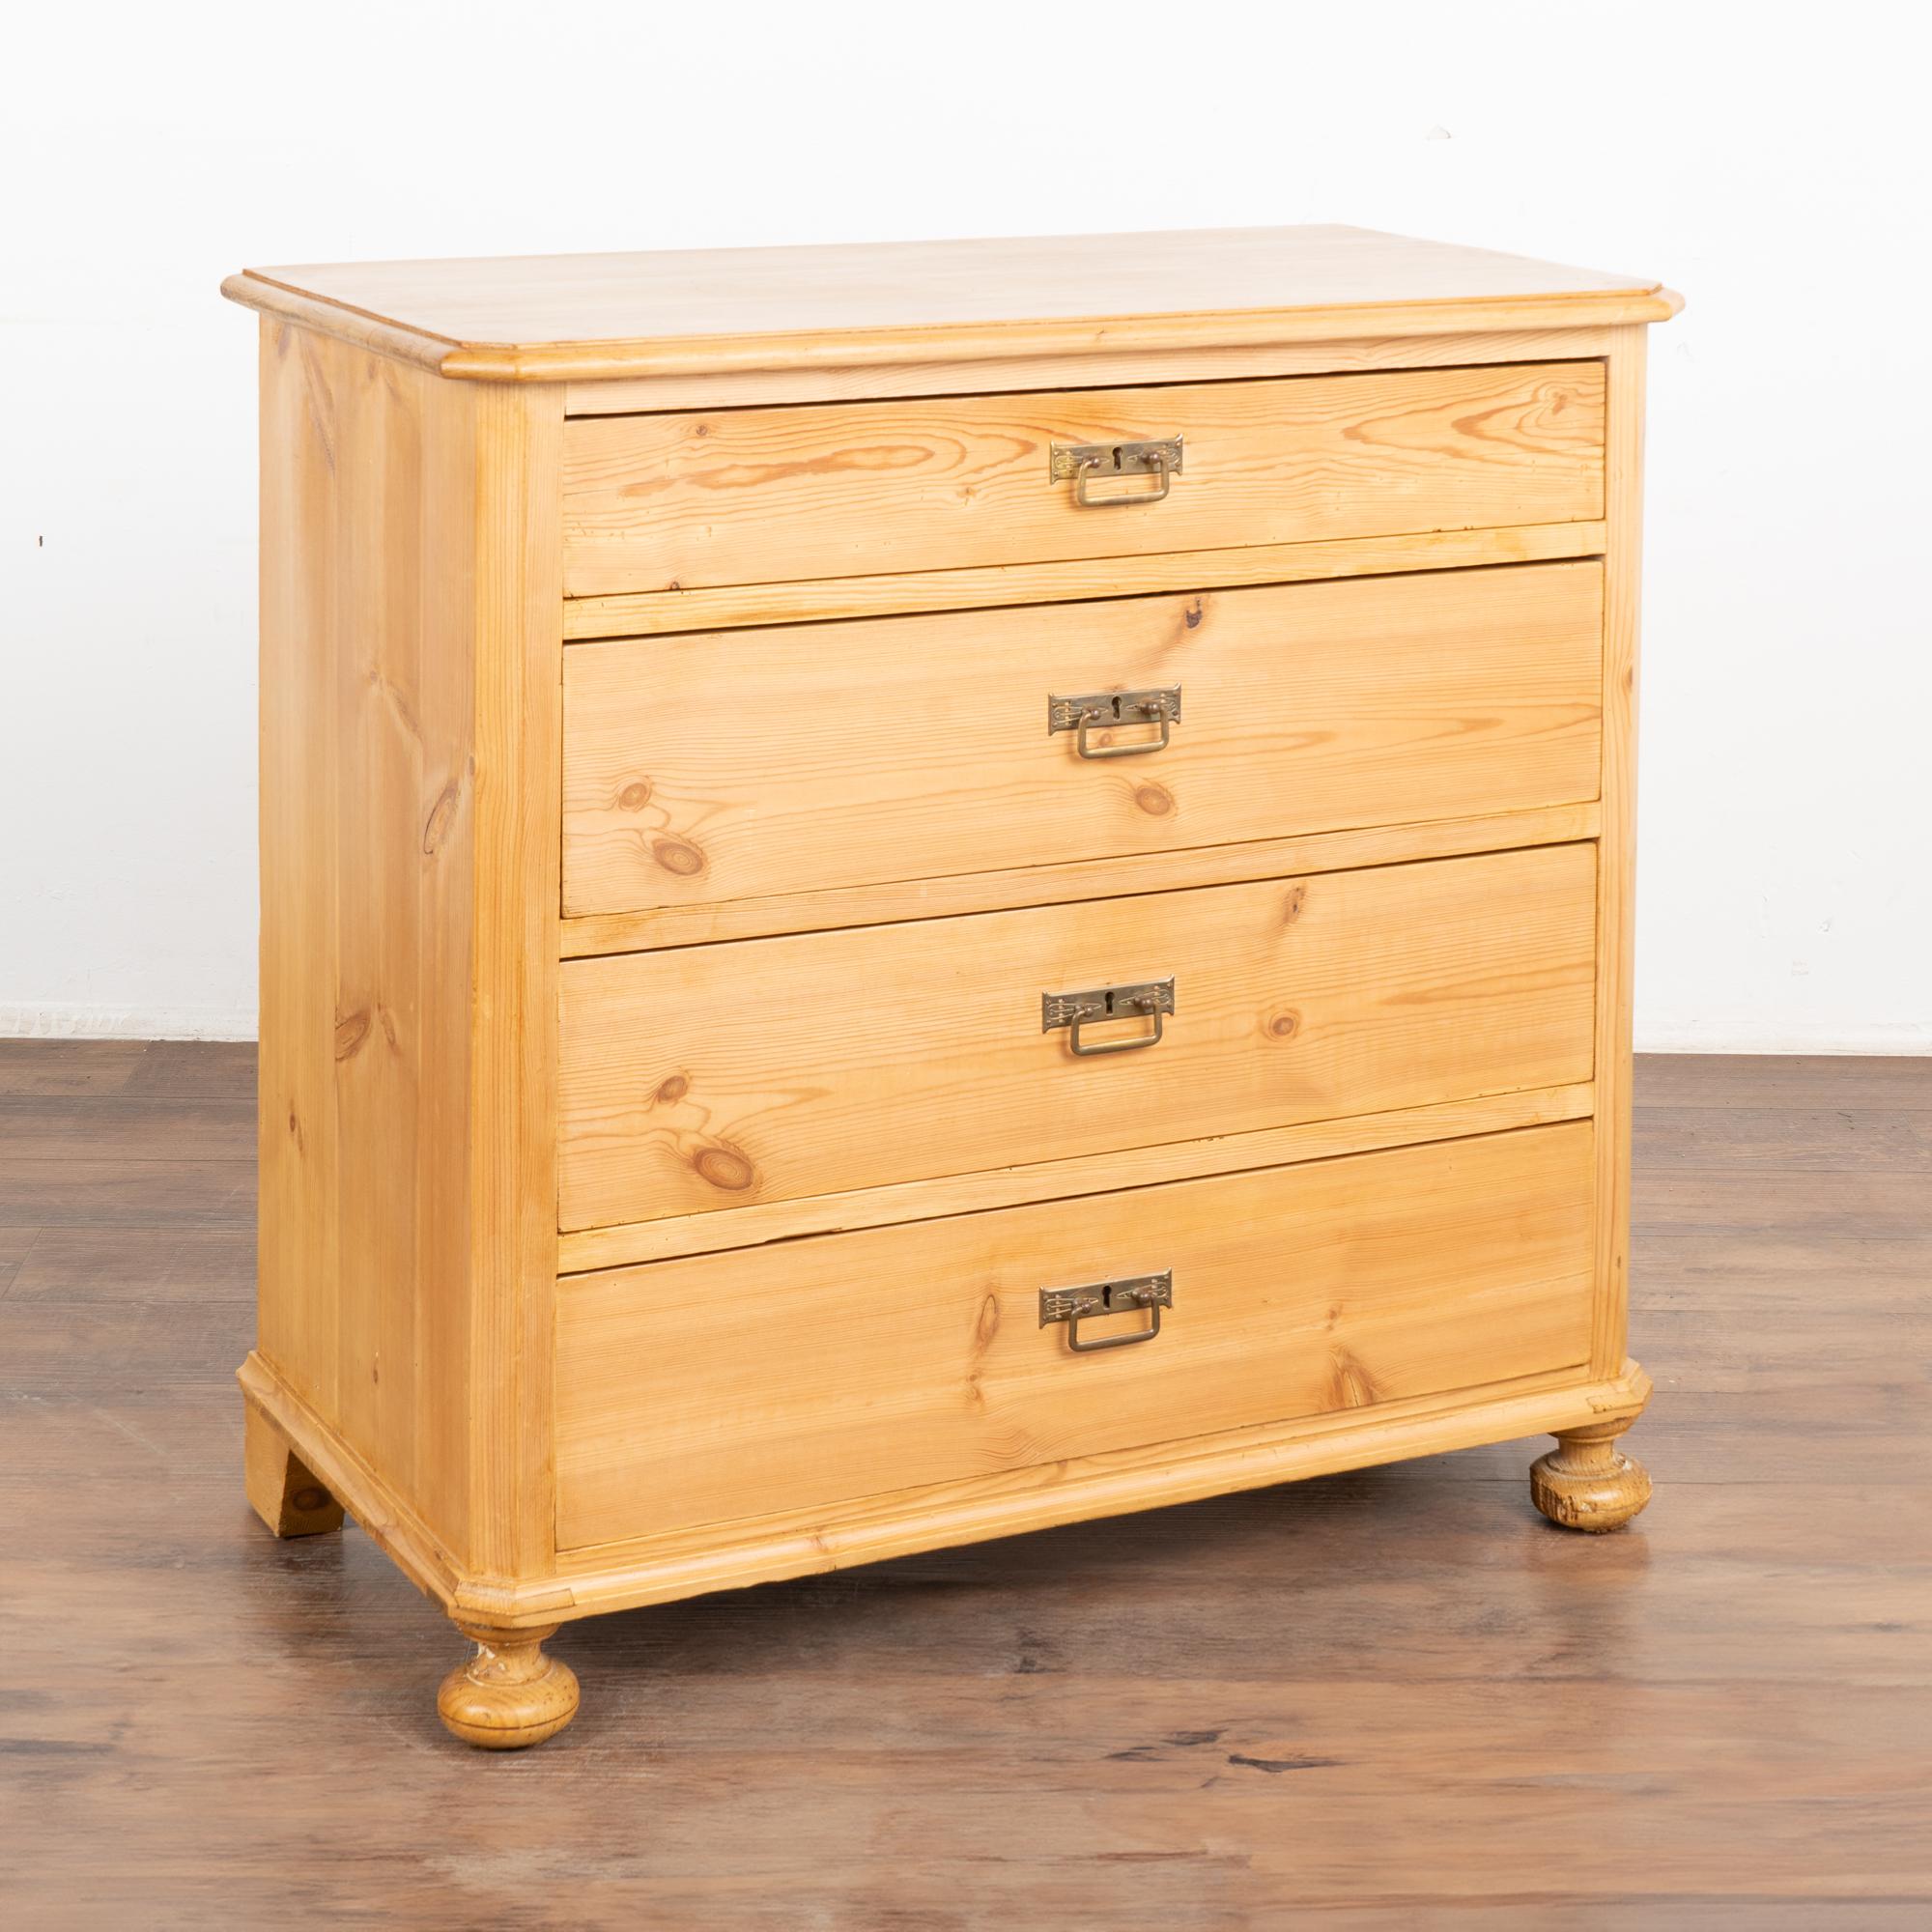 Antique pine chest of four drawers resting on bun feet.
Simple clean lines, dove-tail joints and brass pulls.
Note the natural wax finish that brings out the warmth of the pine. 
Restored, this dresser is strong, stable and ready for use. Drawers